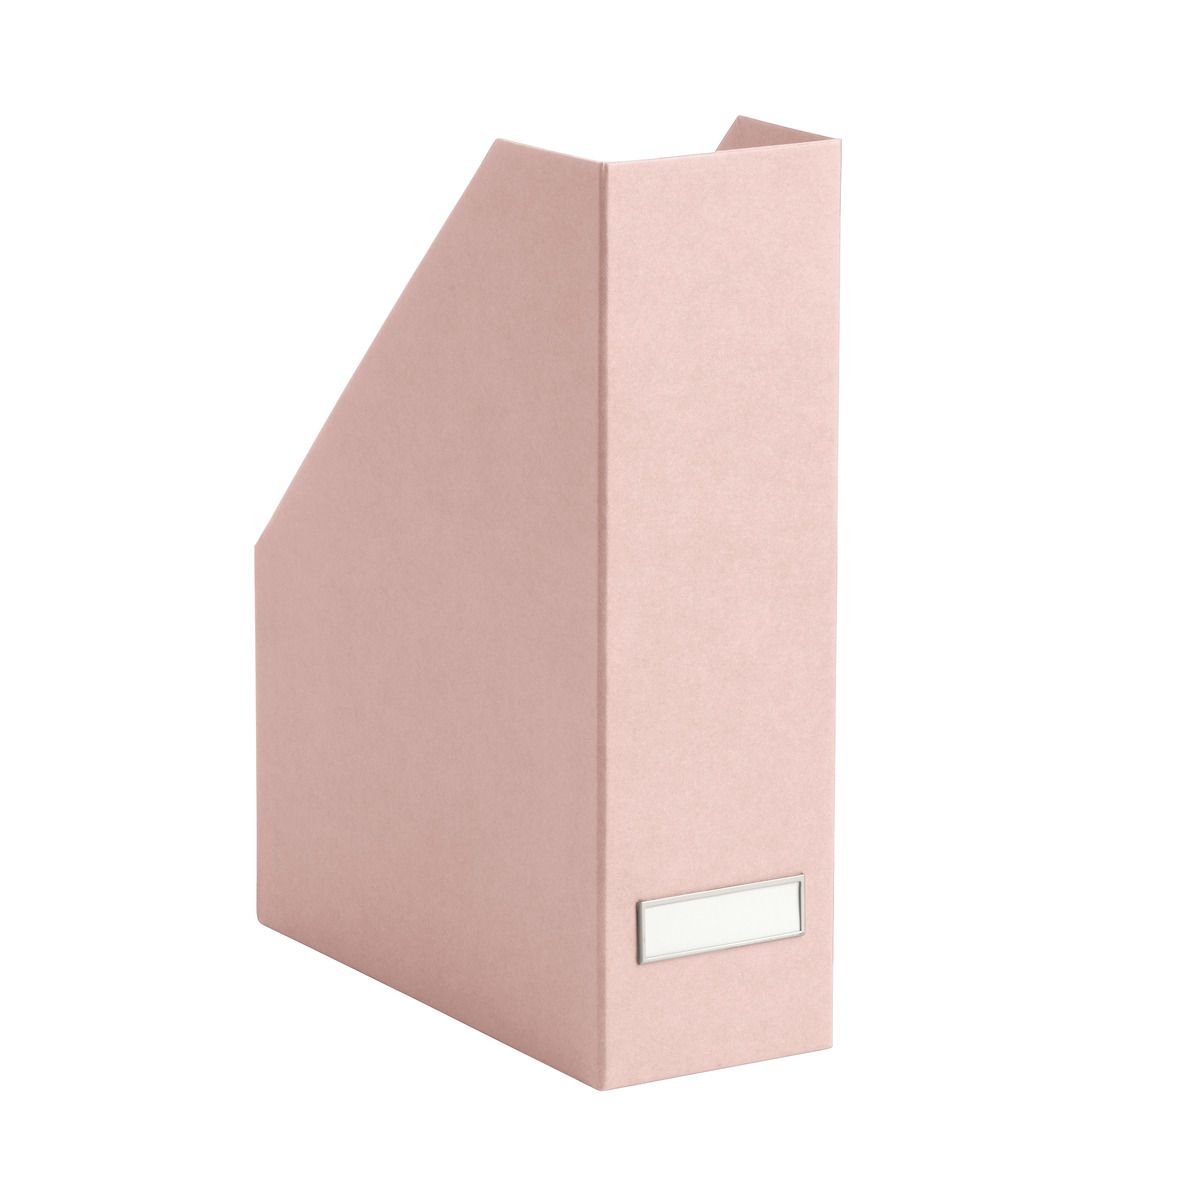 Stockholm Magazine Holder | The Container Store